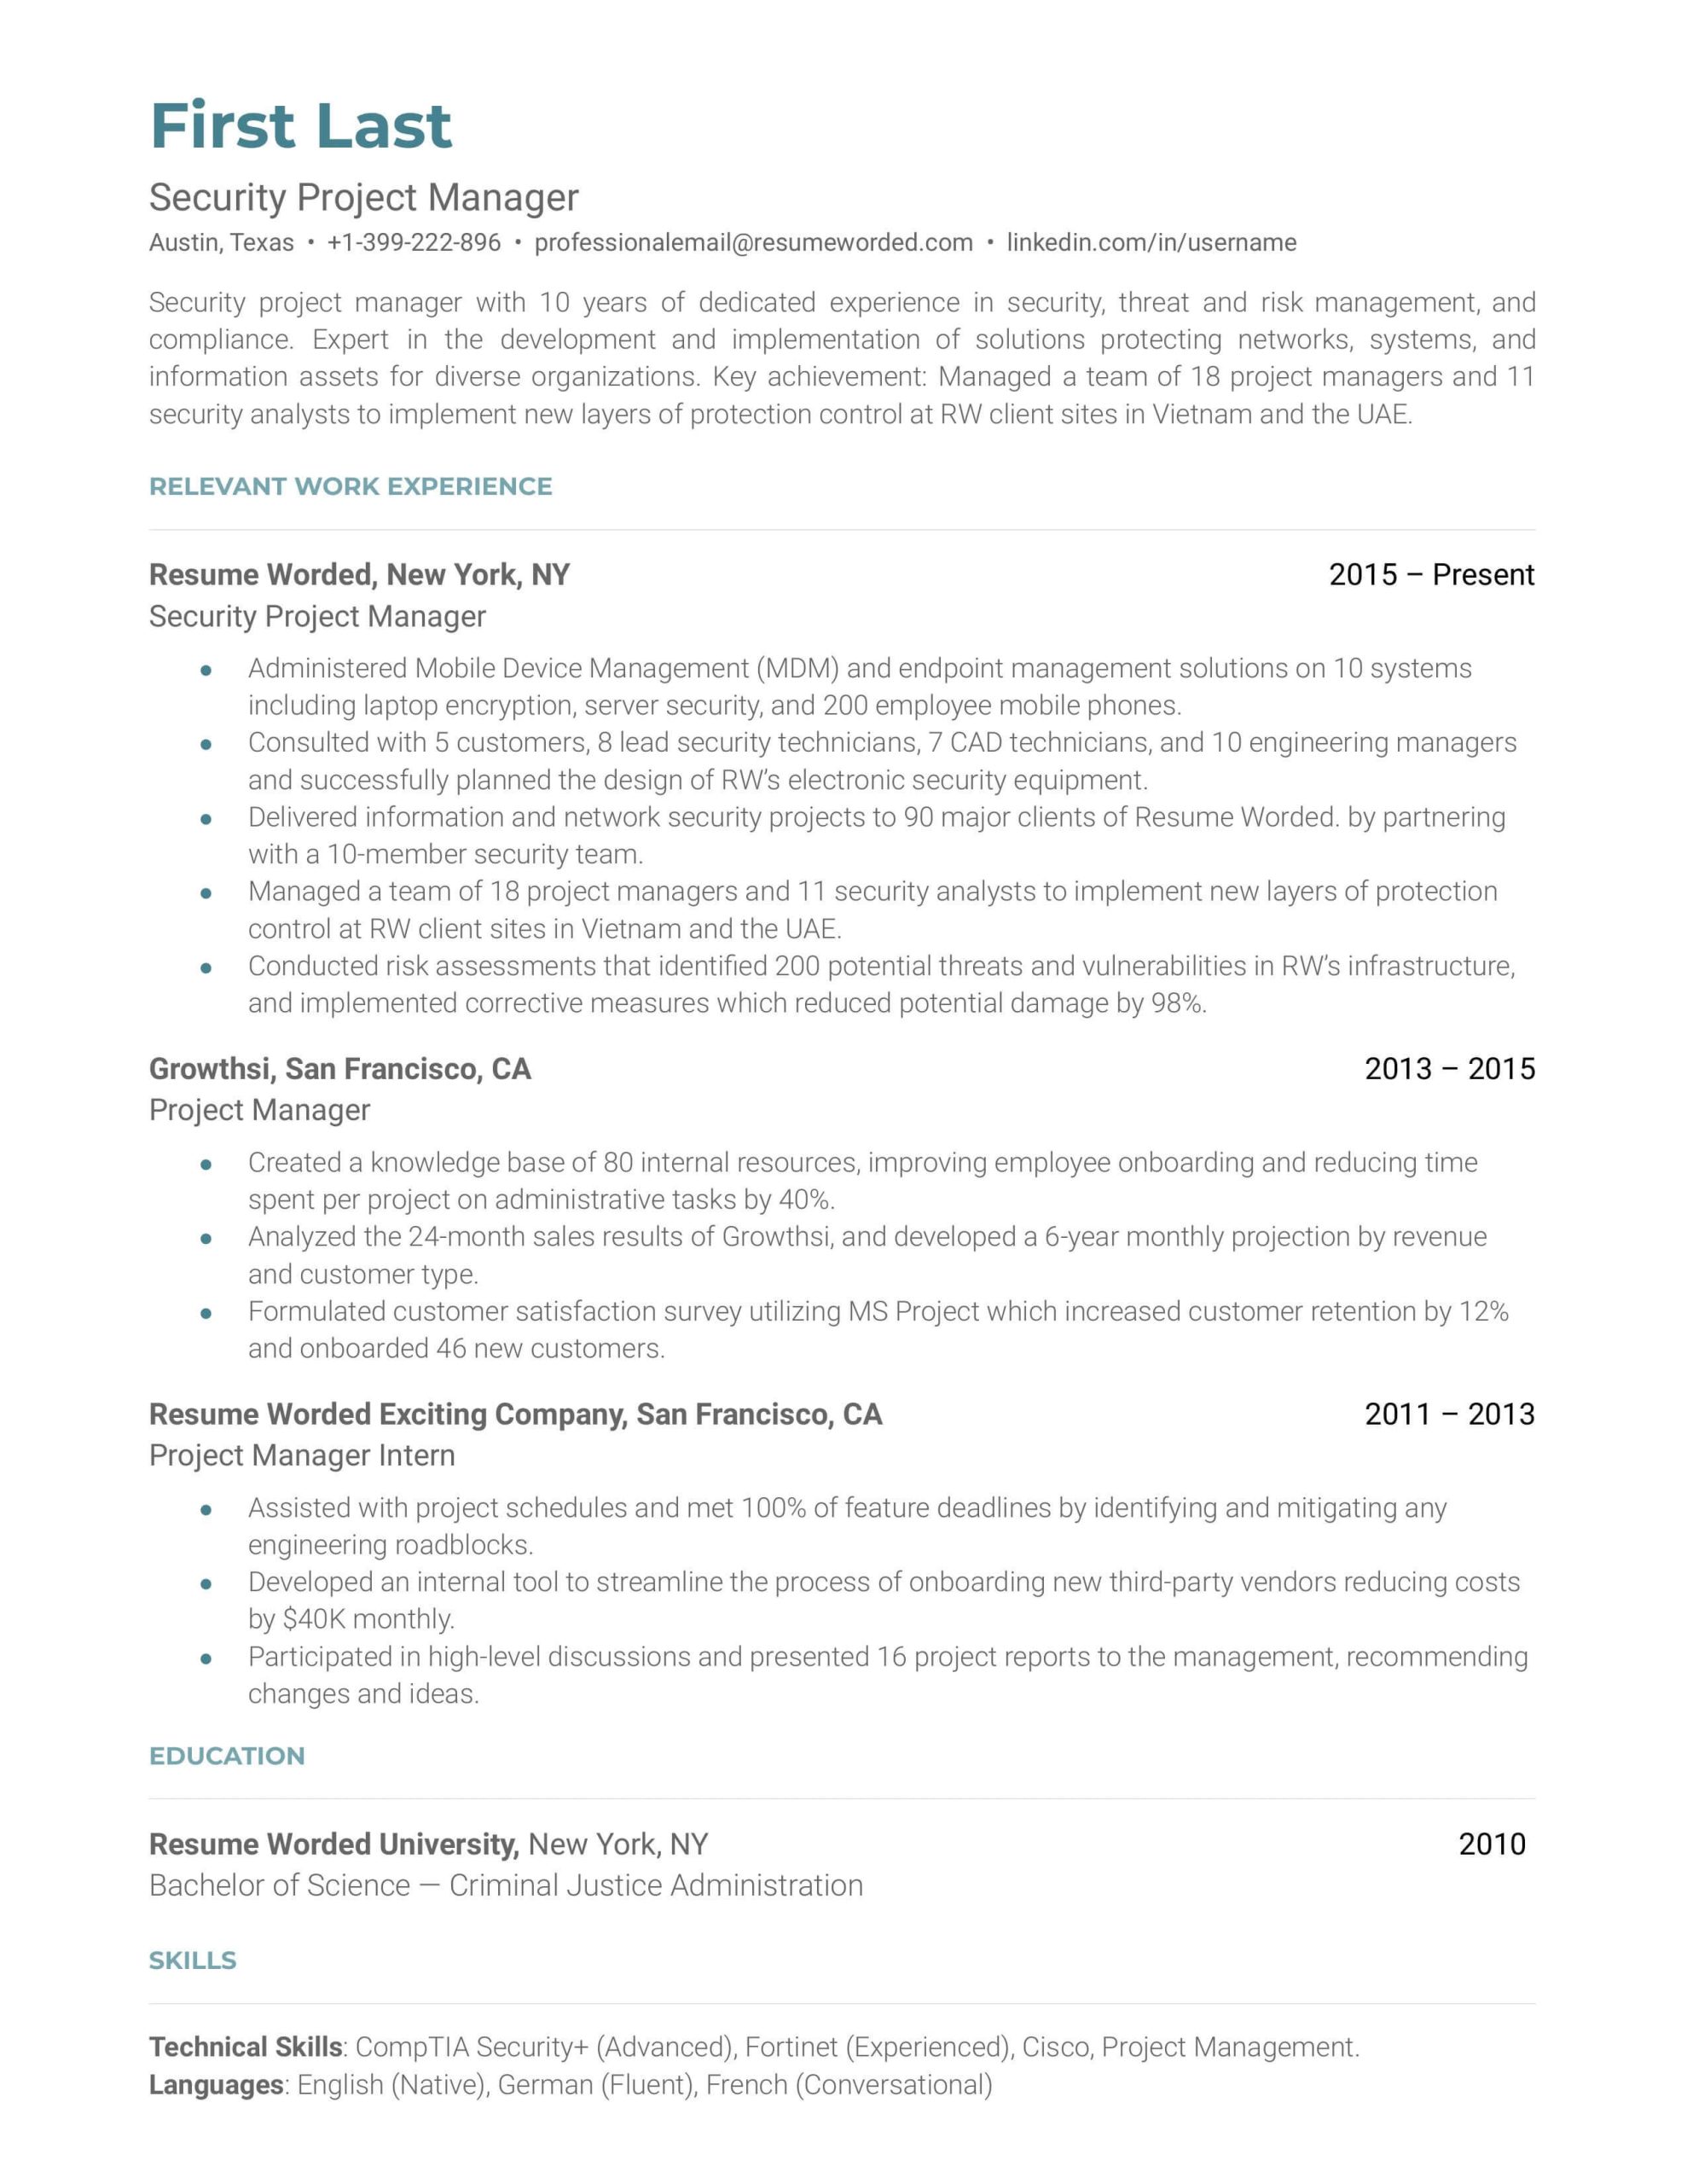 Sample Resume Of Health Care Project Manager Healthcare Project Manager Resume Example for 2022 Resume Worded